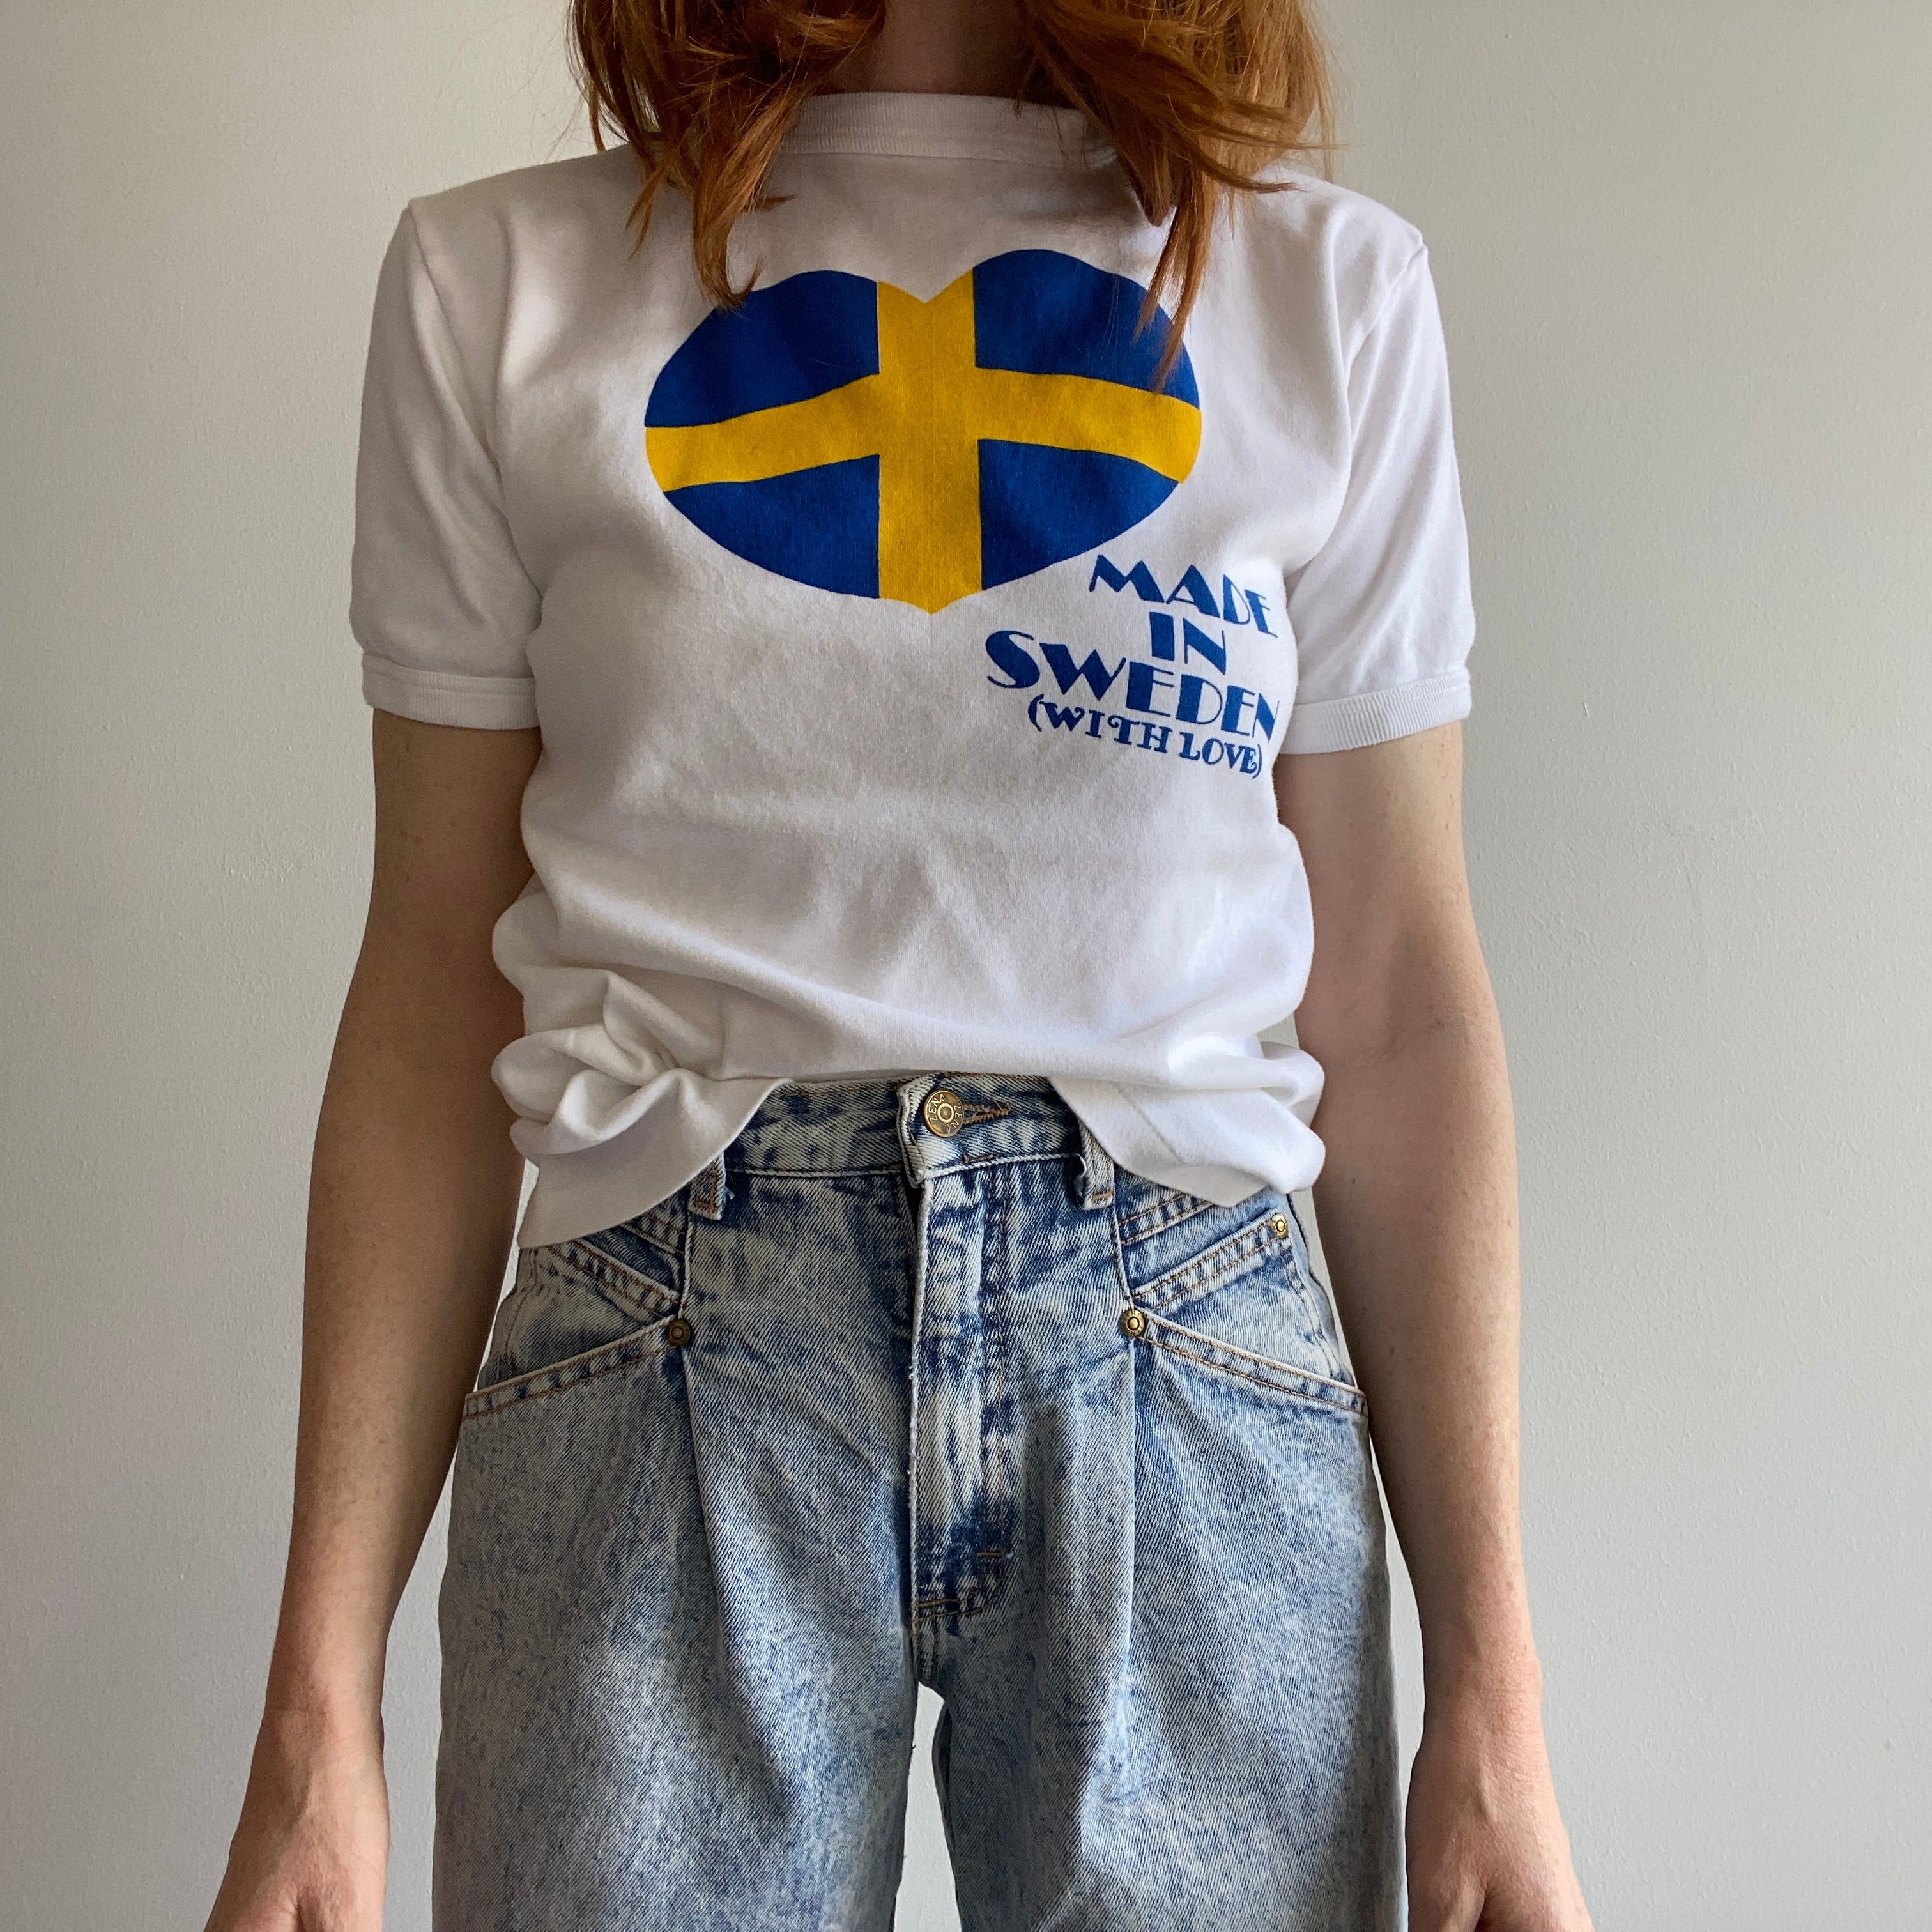 1970/80s Made in Sweden Structured Cotton Ring T-Shirt